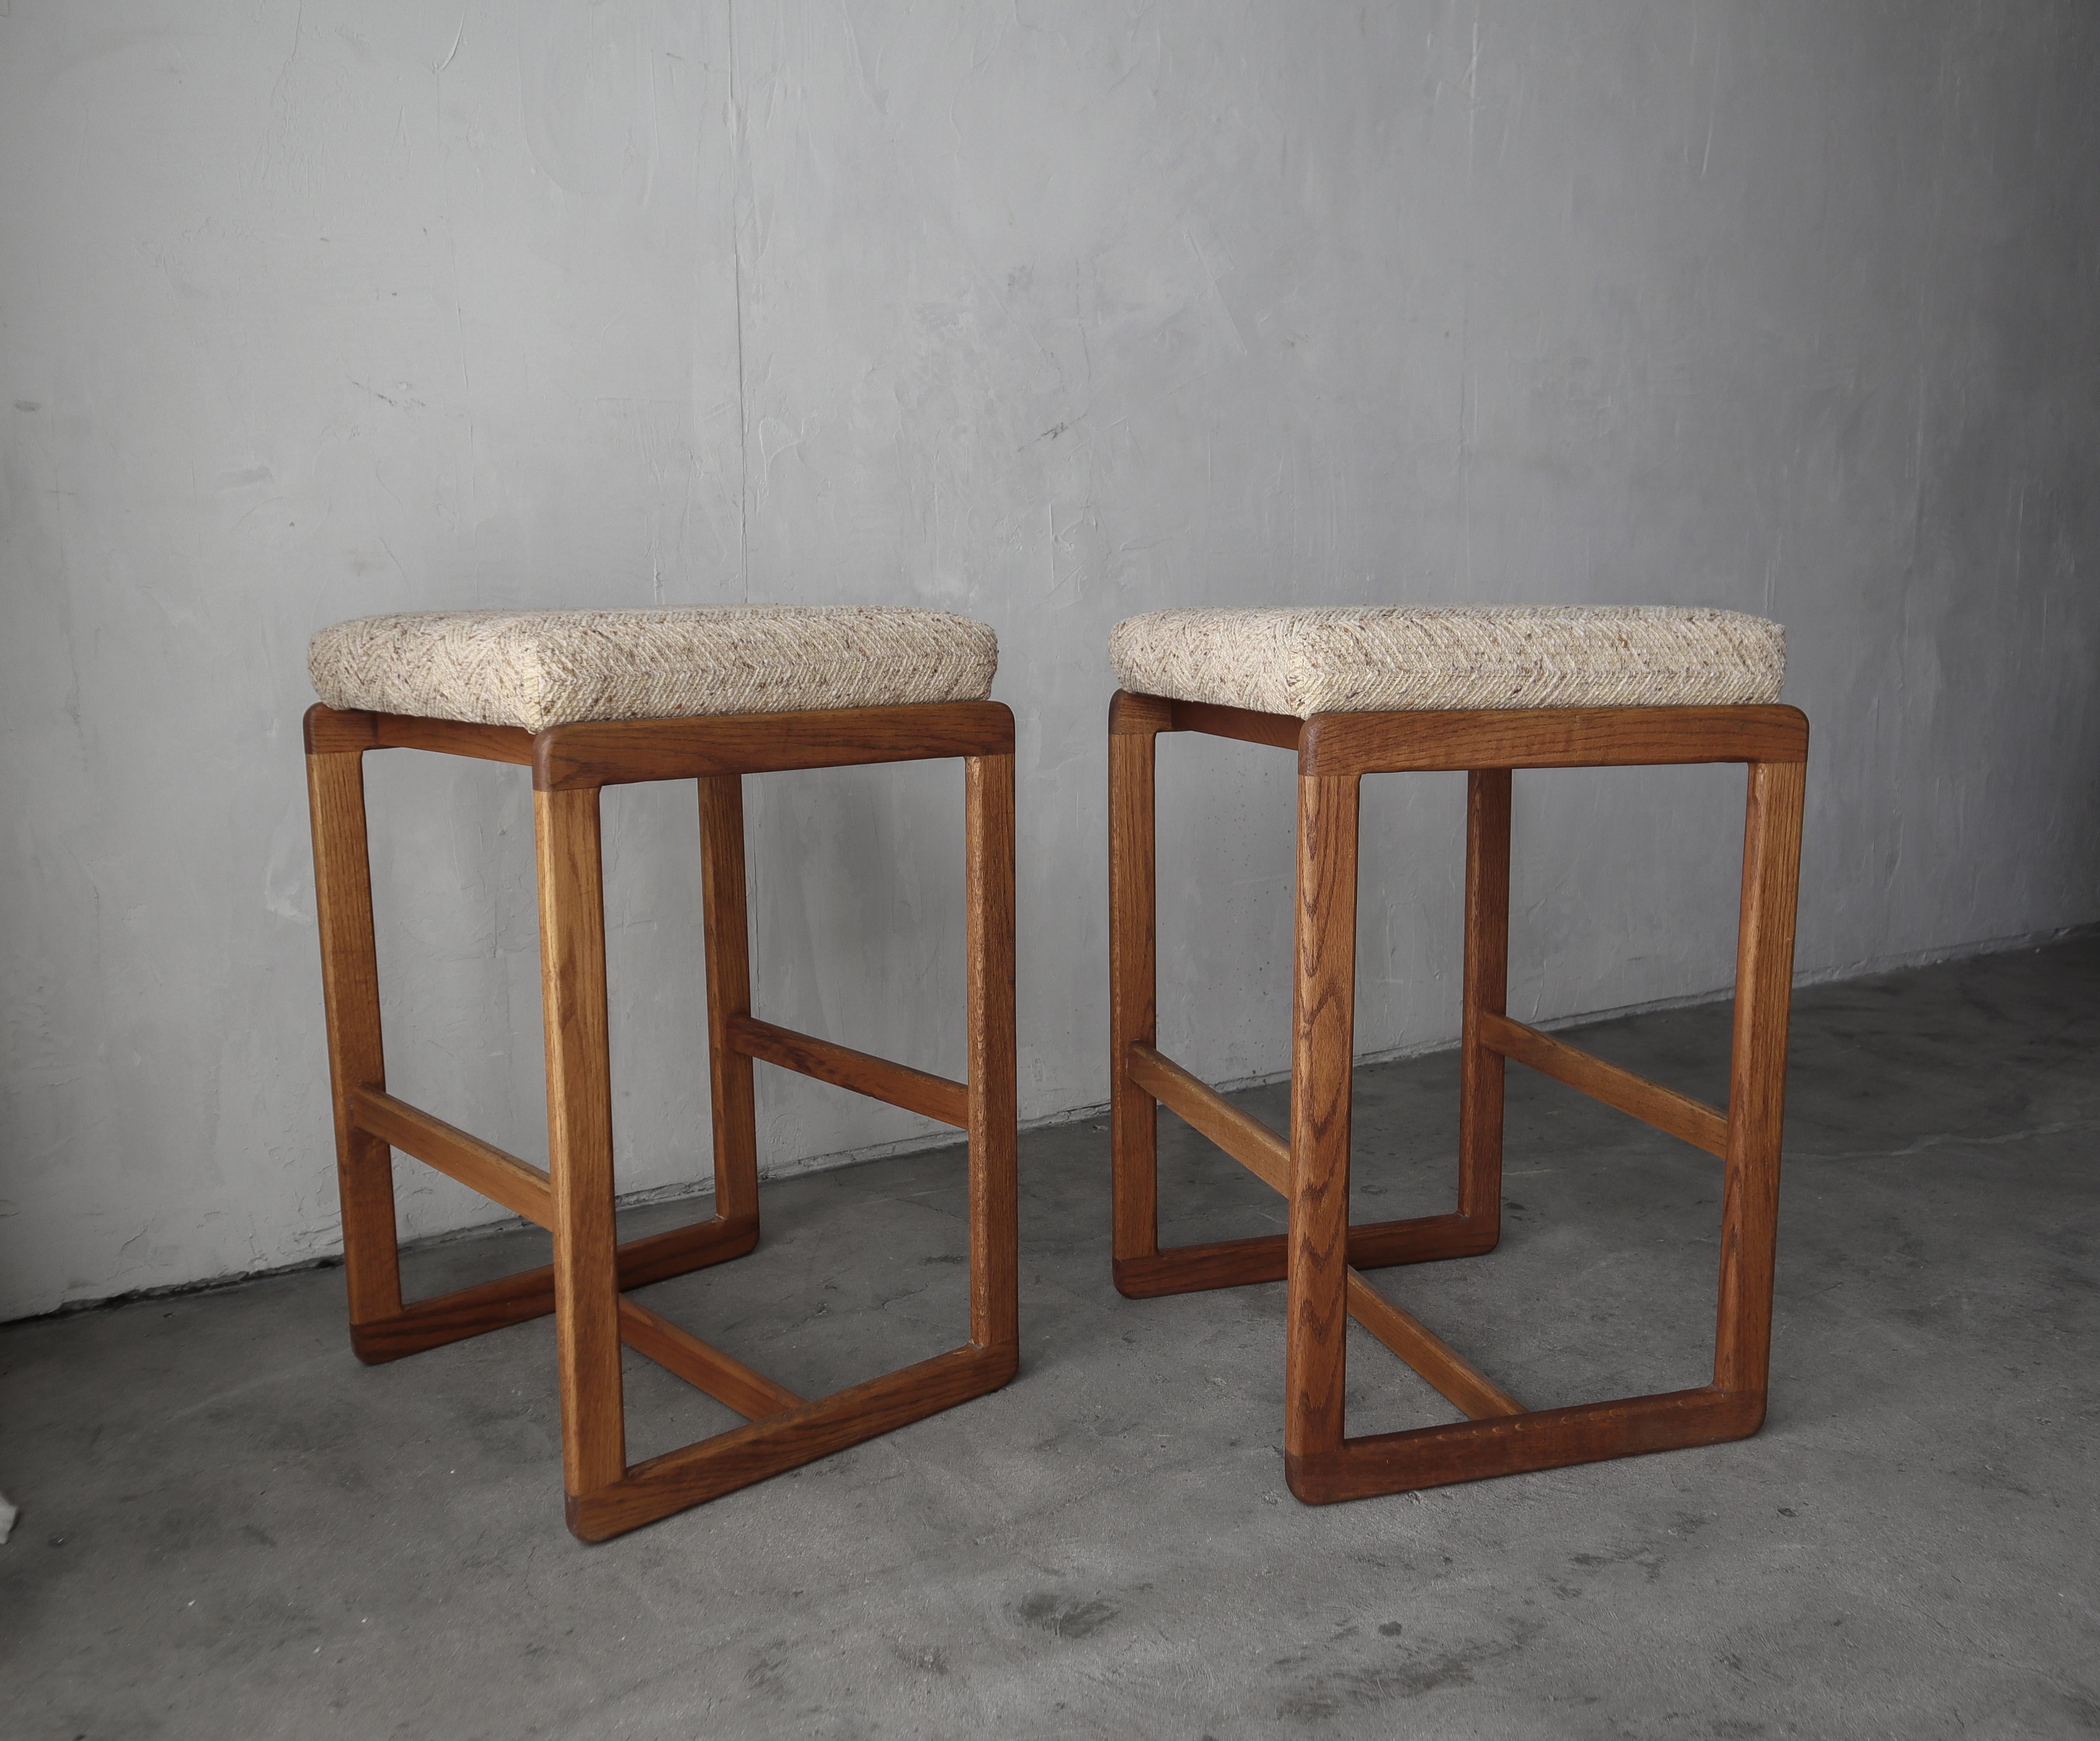 Great pair of vintage, oversized, oak barstools. Love their curved edges.

Solid, no damage.  Fabric is all original, can be used as is but ready for you to modernize and customize if you choose.